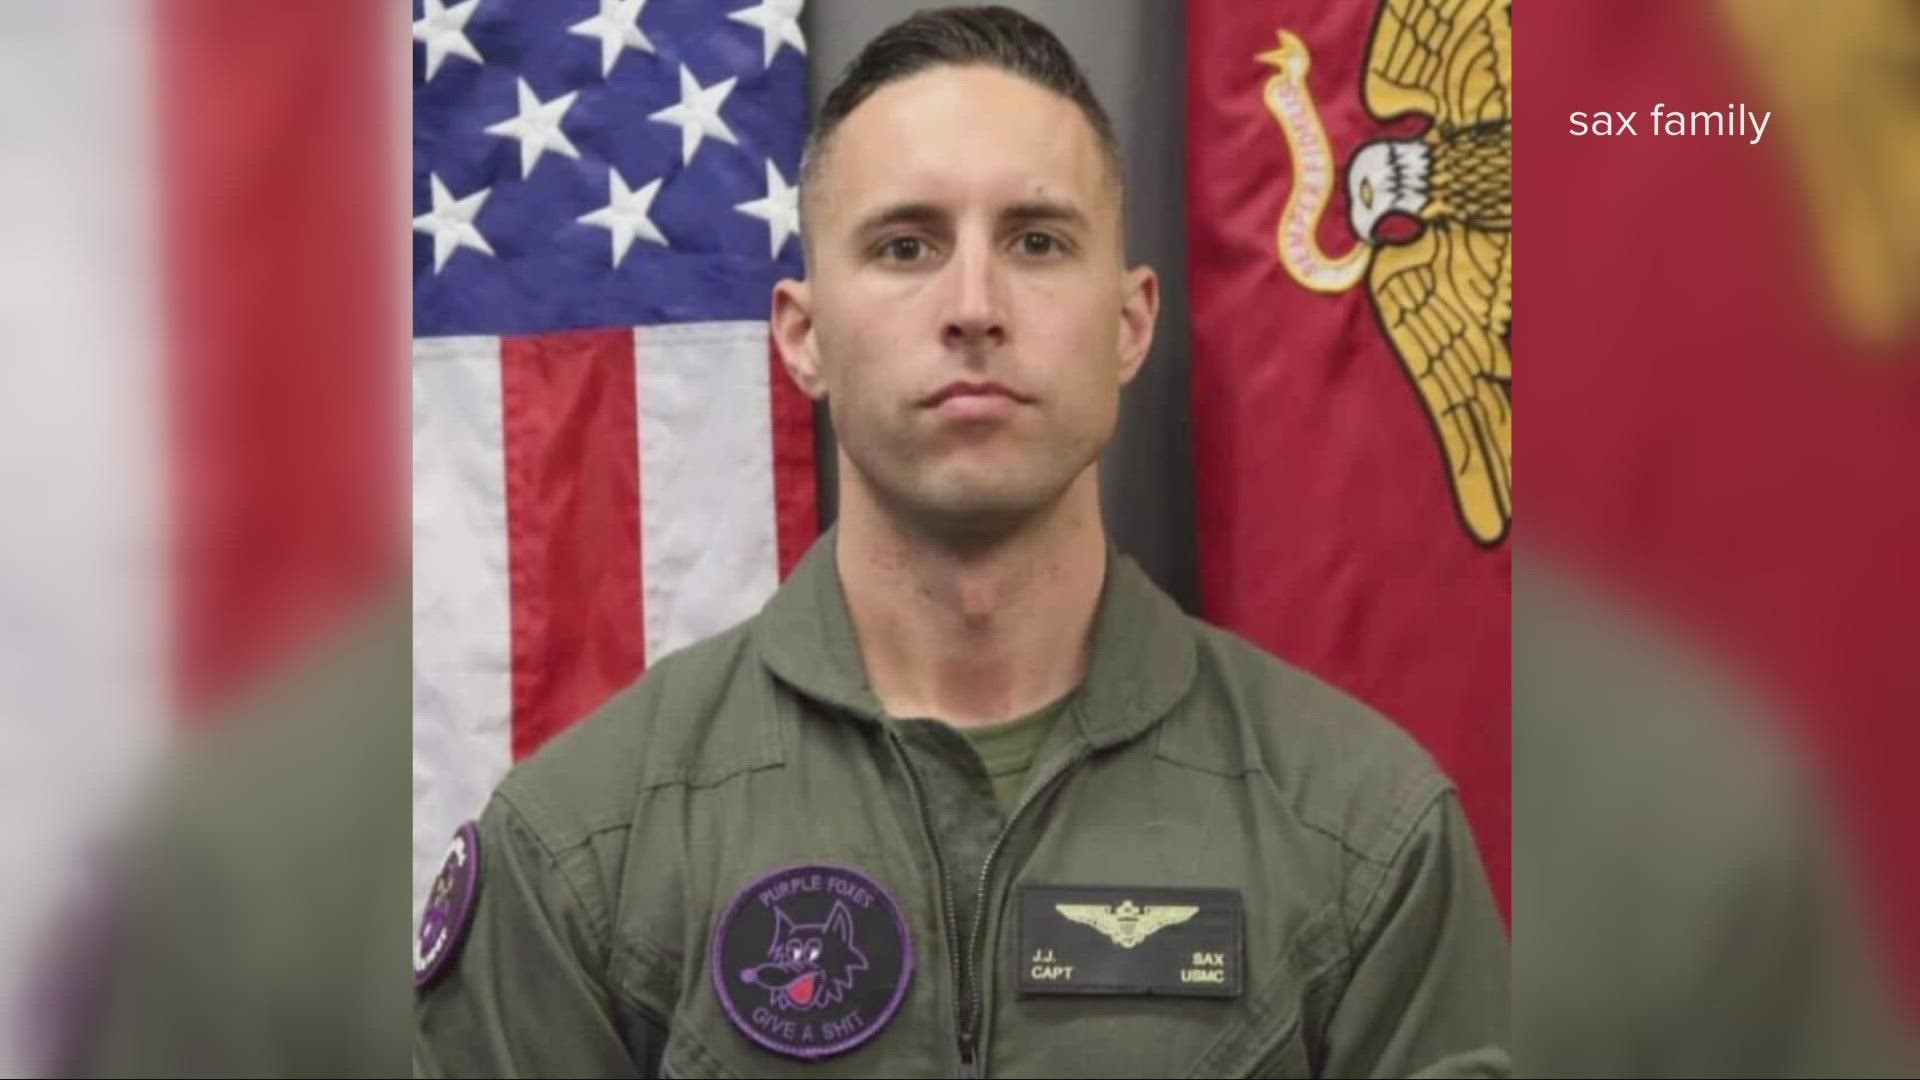 One of the five U.S. Marines killed when their Osprey aircraft crashed during a training flight near Glamis in Imperial County was identified as, Capt. John J. Sax.